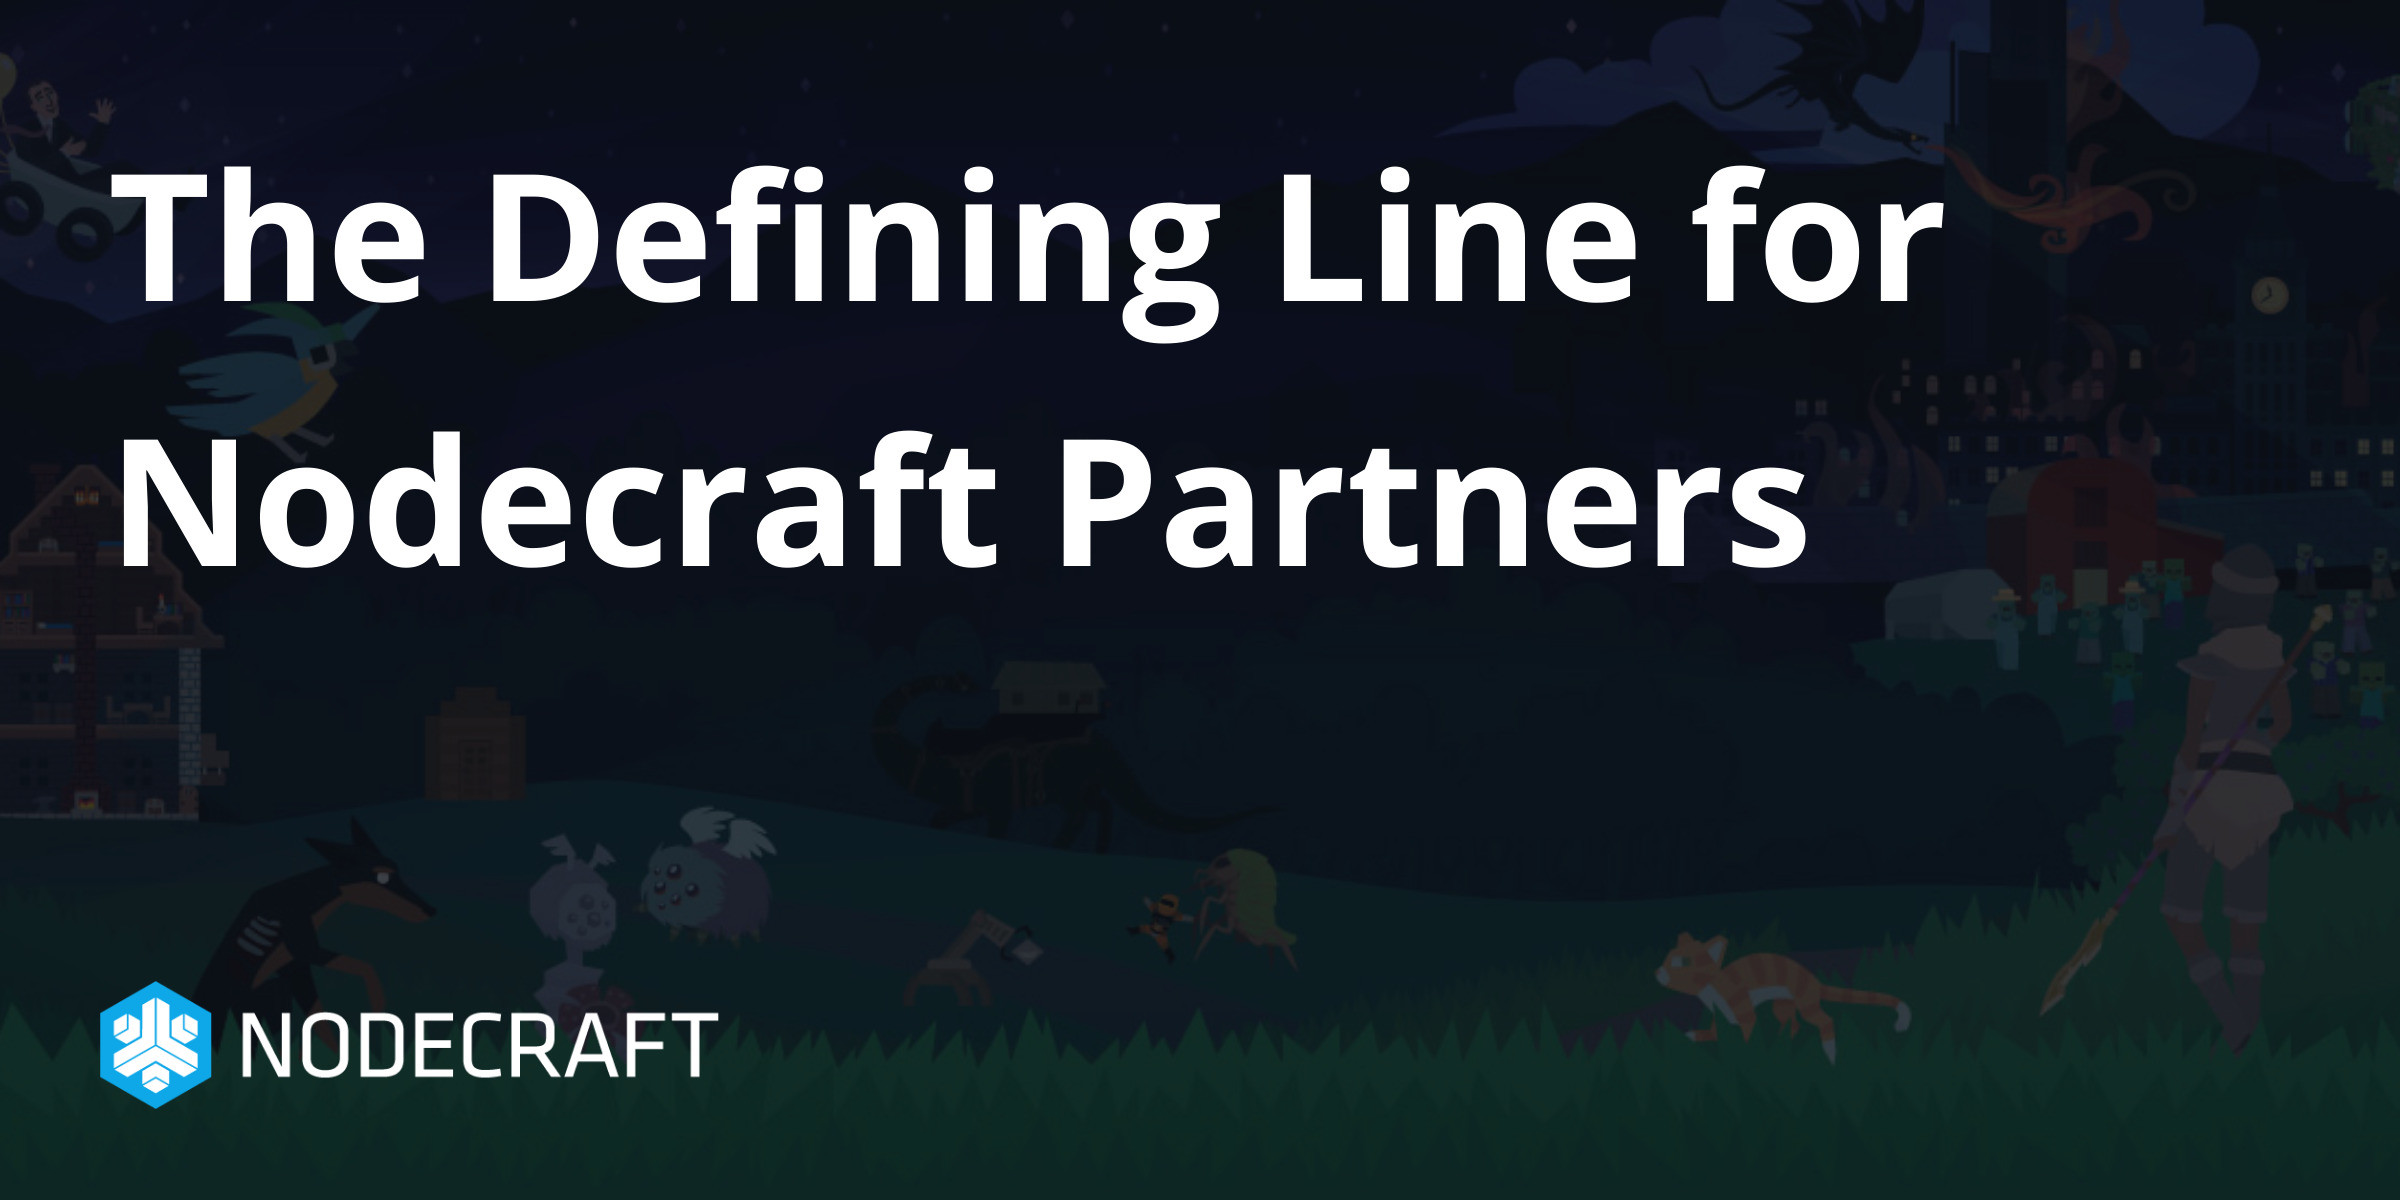 The Defining Line for Nodecraft Partners